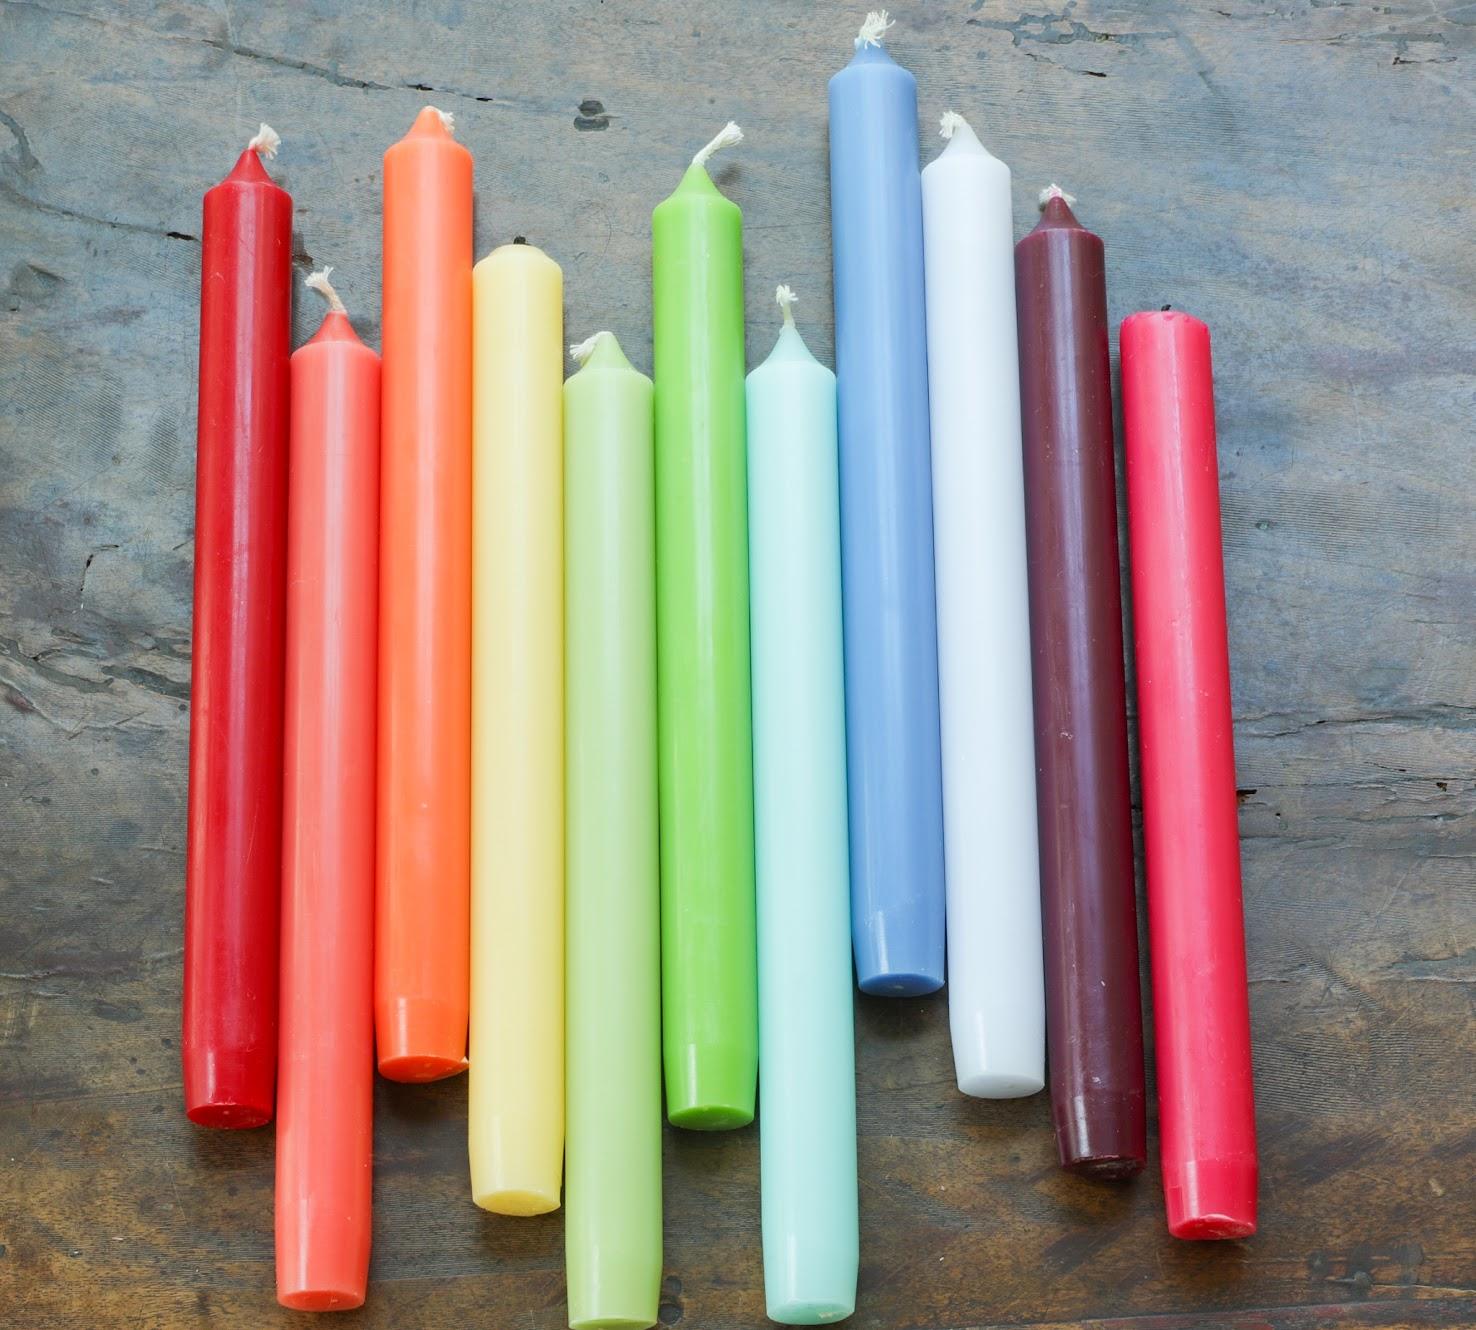 A colorful collection of long candles for parties and events.